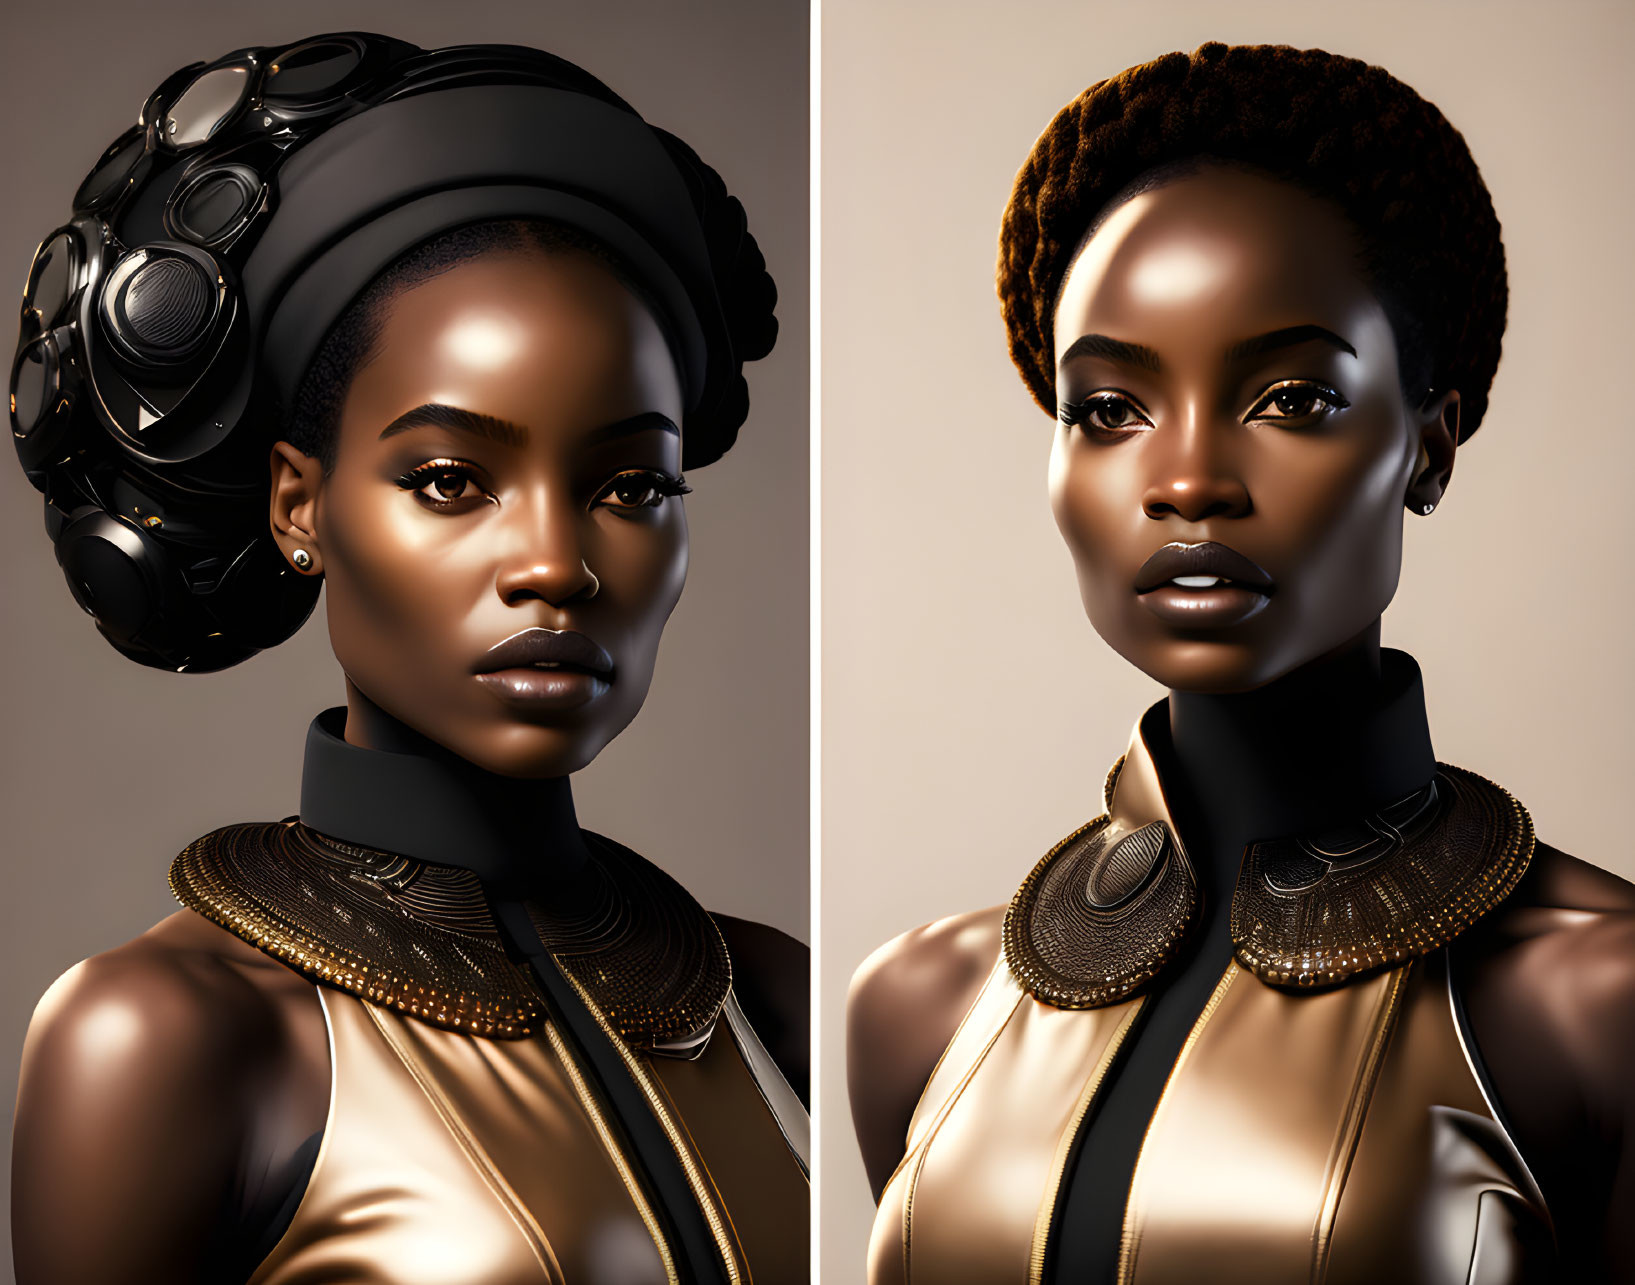 Dark-skinned woman portraits with futuristic hairstyles and elegant golden outfits